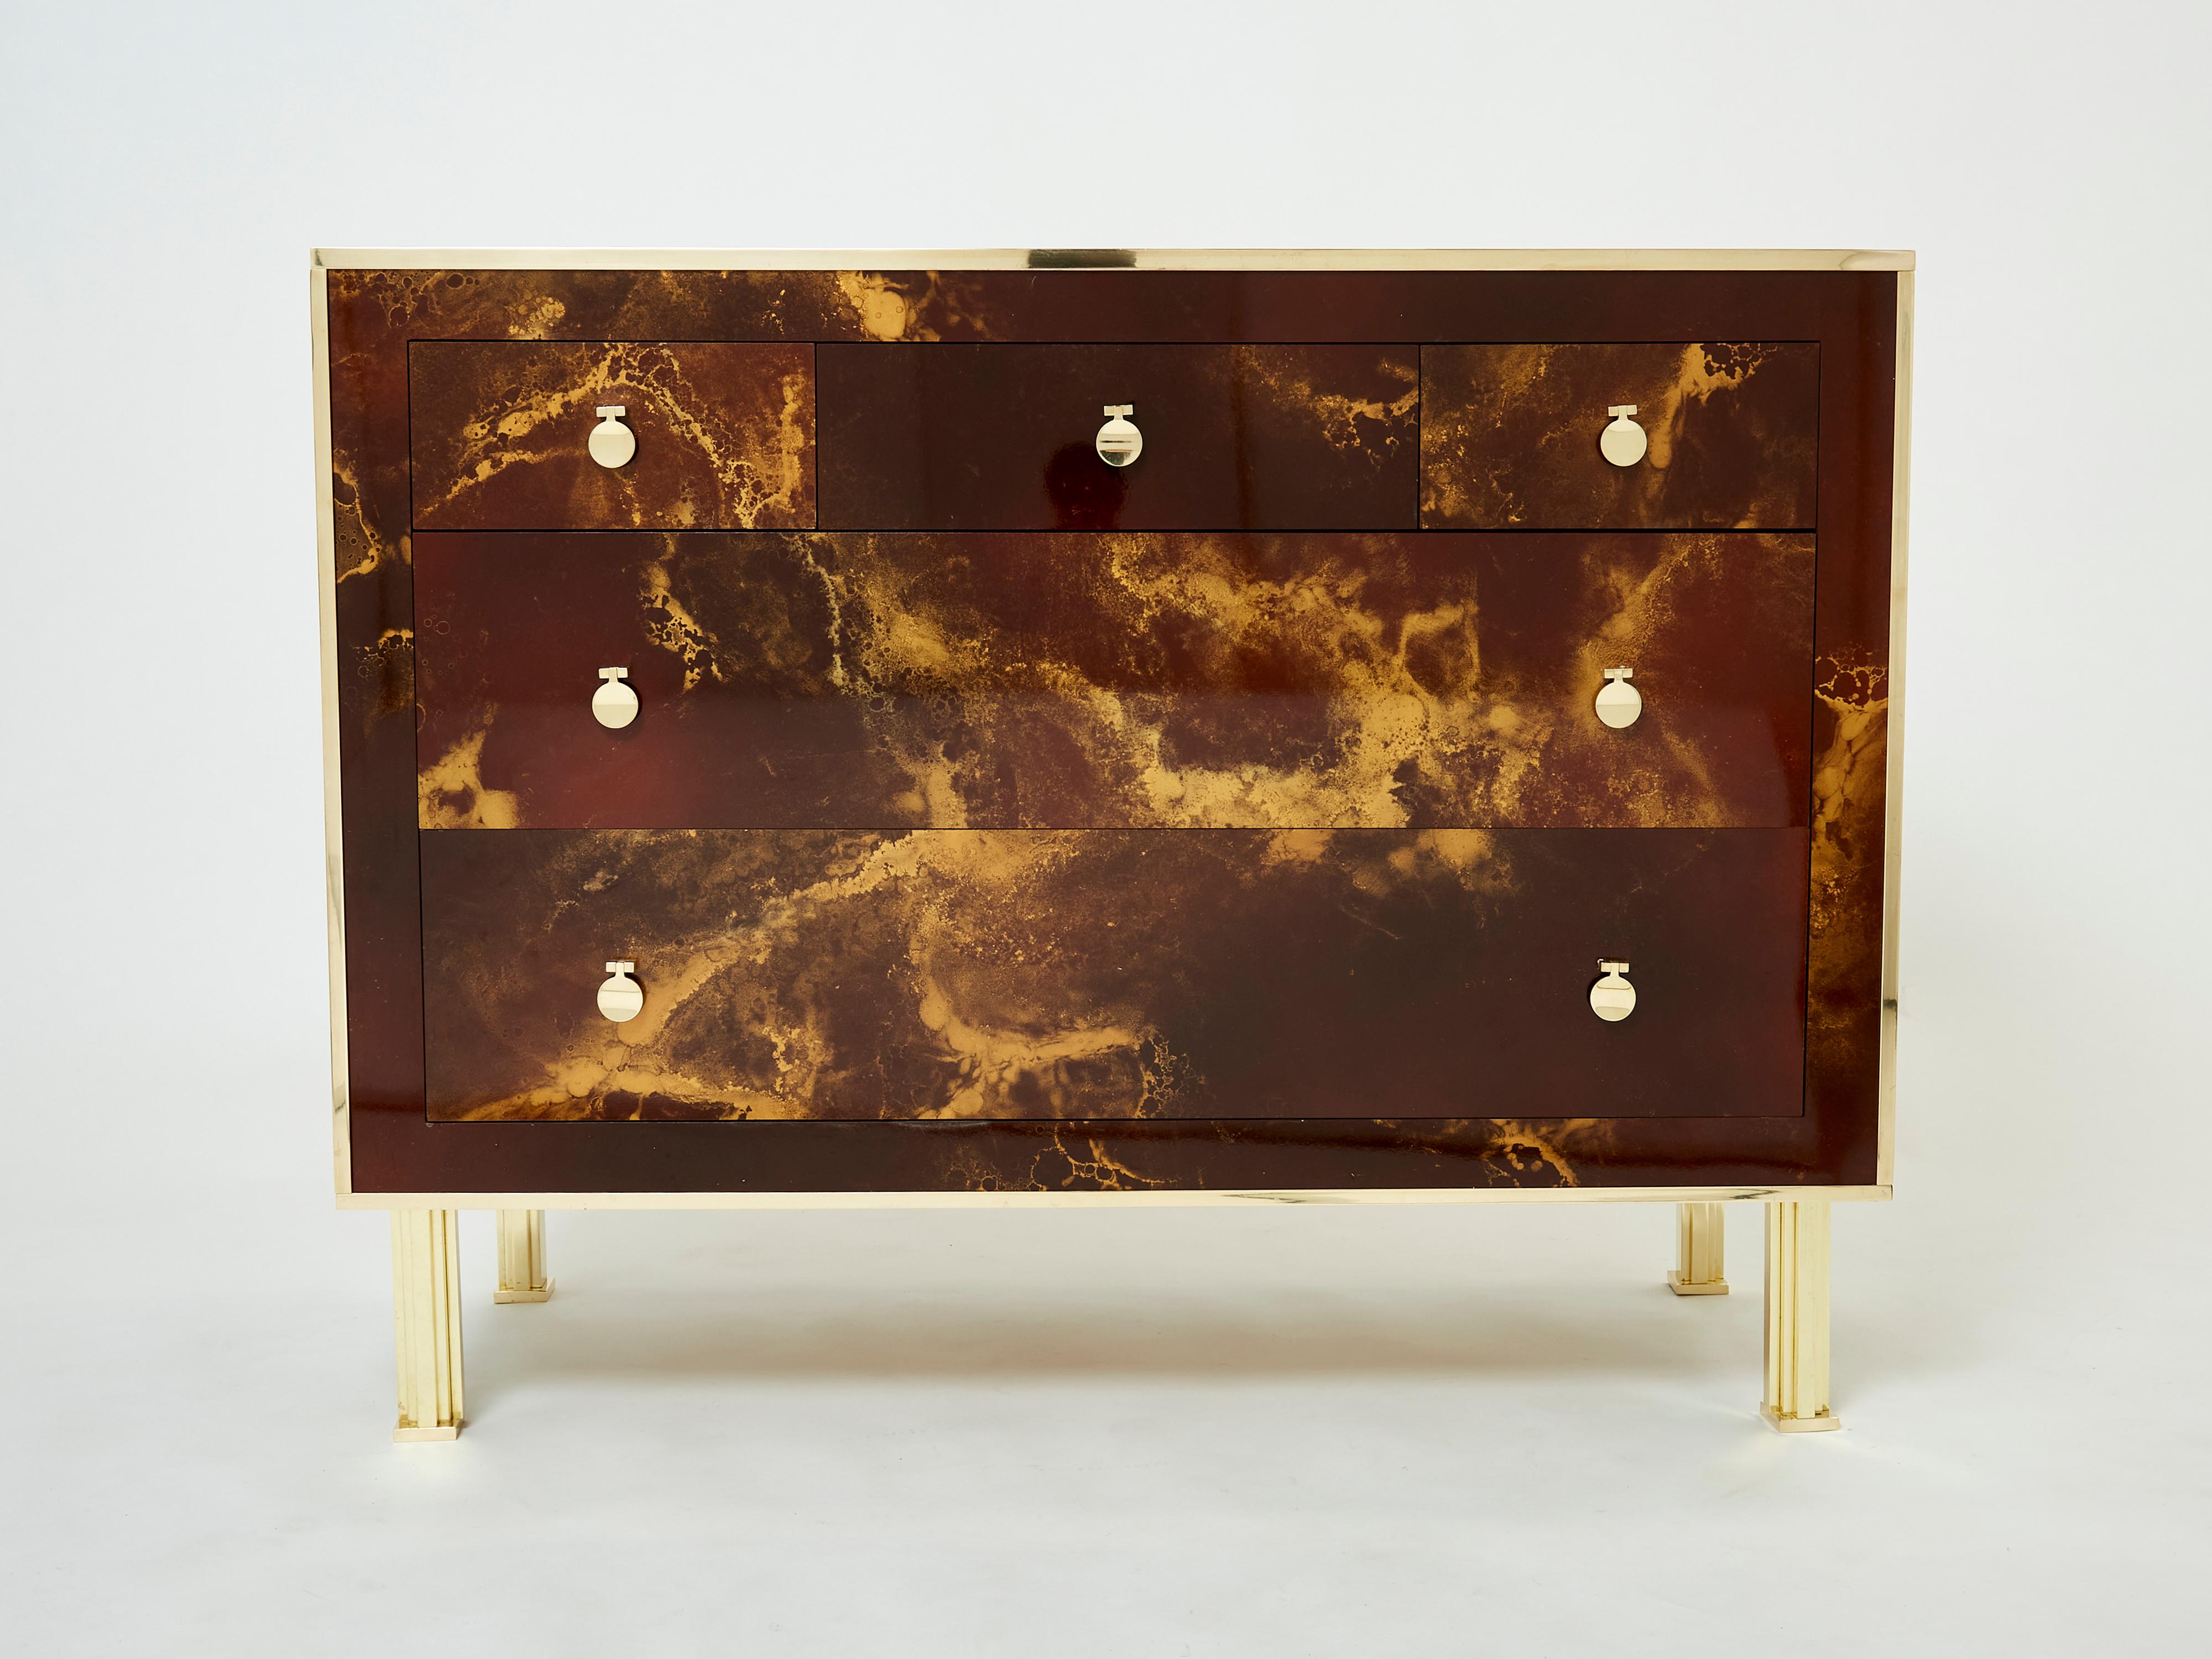 An exciting example of French design firm Maison Jansen’s commissioned pieces. This chest of drawers is made from solid mahogany, lacquered in a rich dark brown and bronze–golden finish. The resulting effect is a beautiful mottling of color around